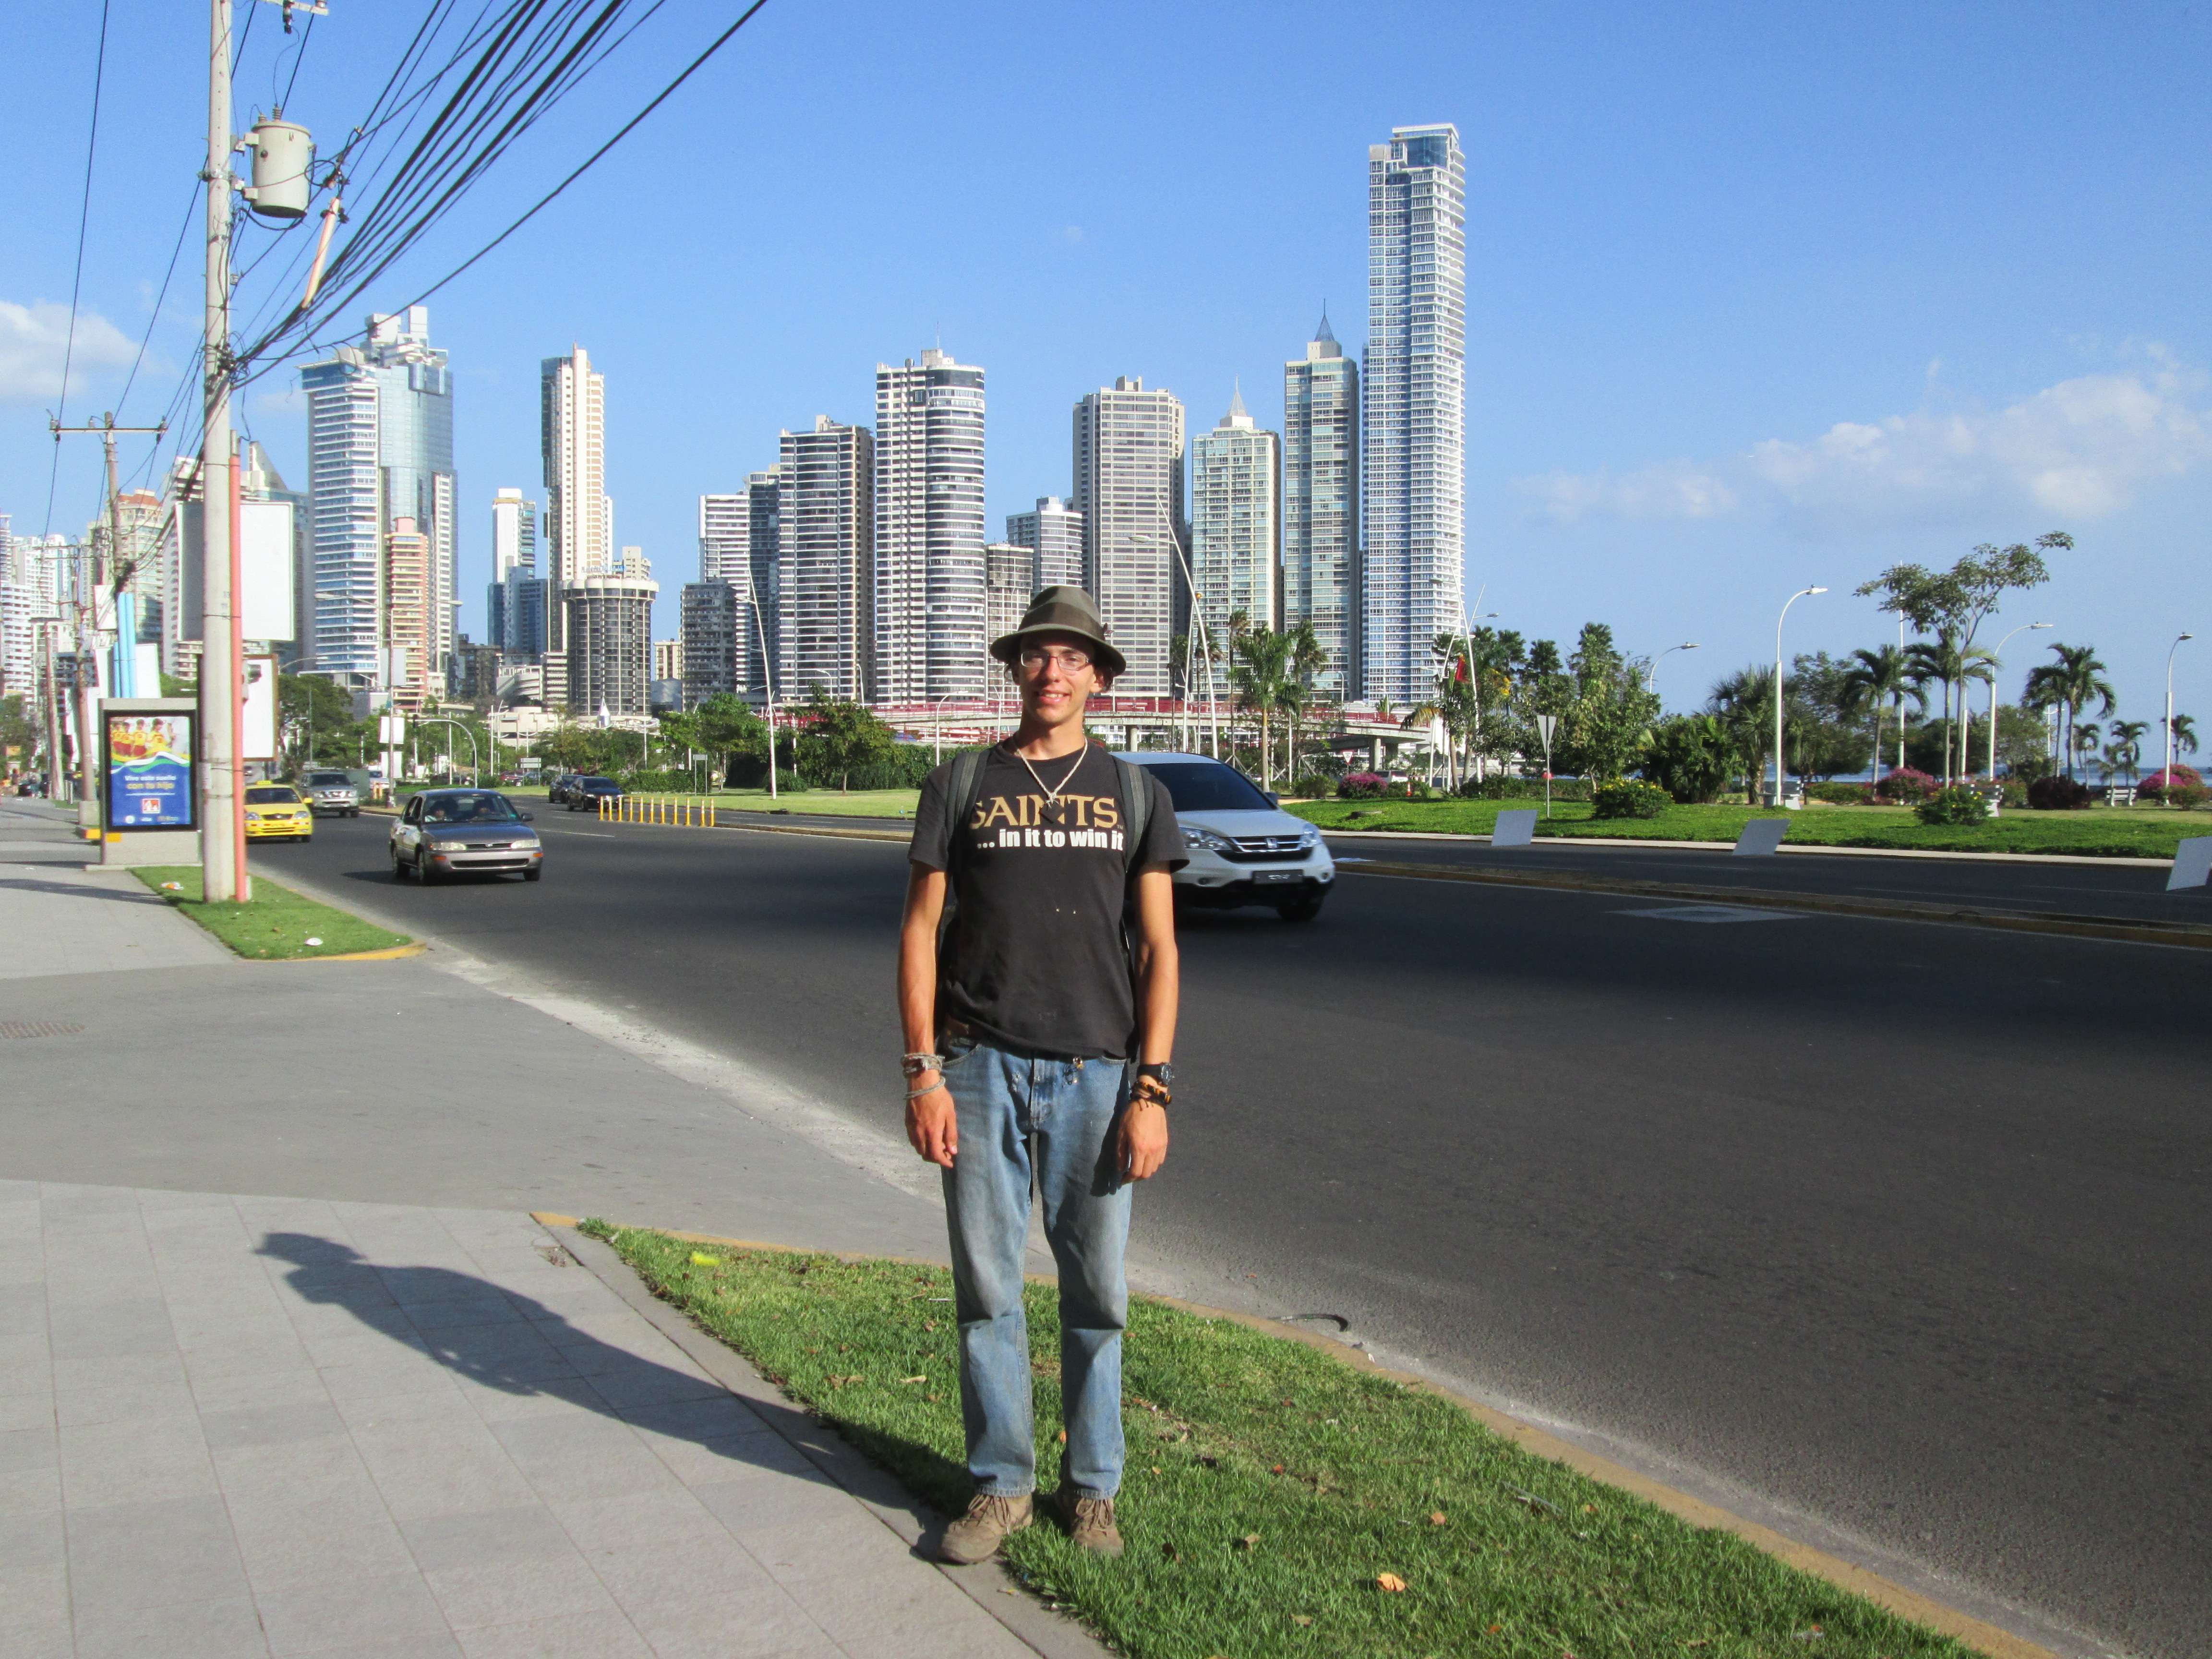 Me in front of the Panama City skyline